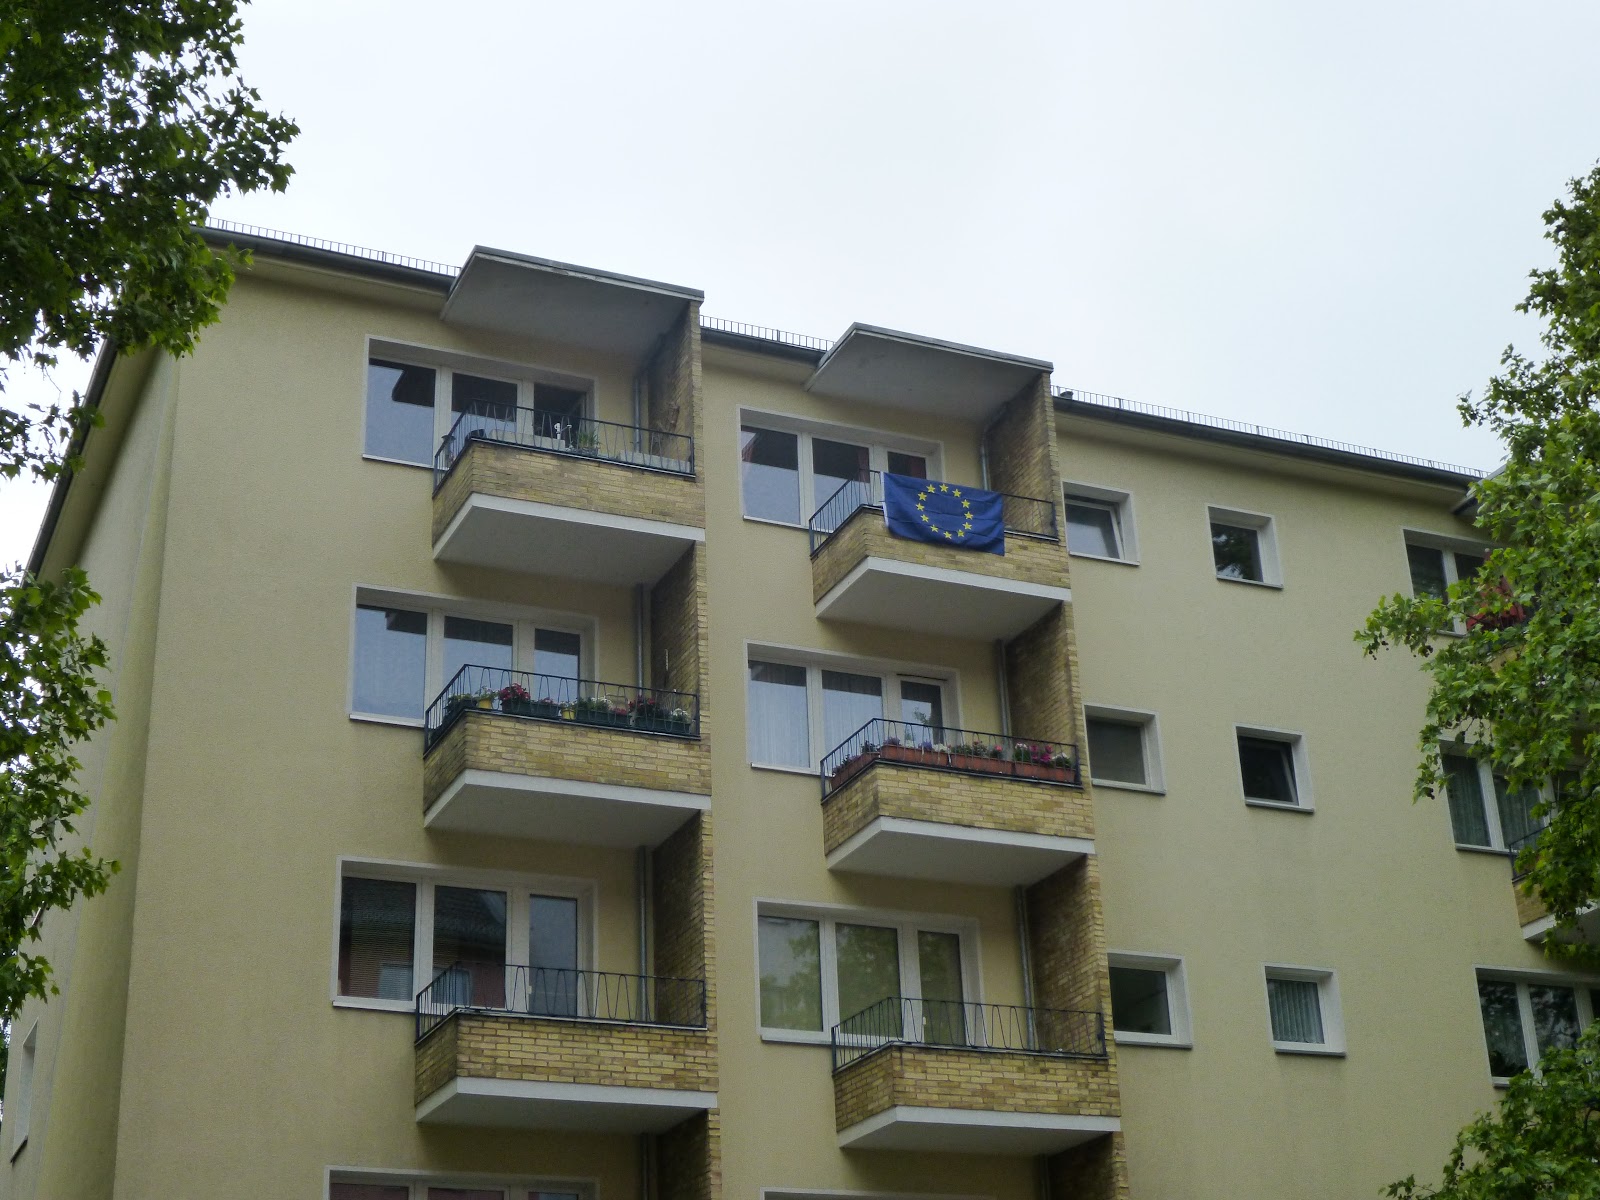 Multi-storey building with several balconies; an EU flag is attached to one of the balconies